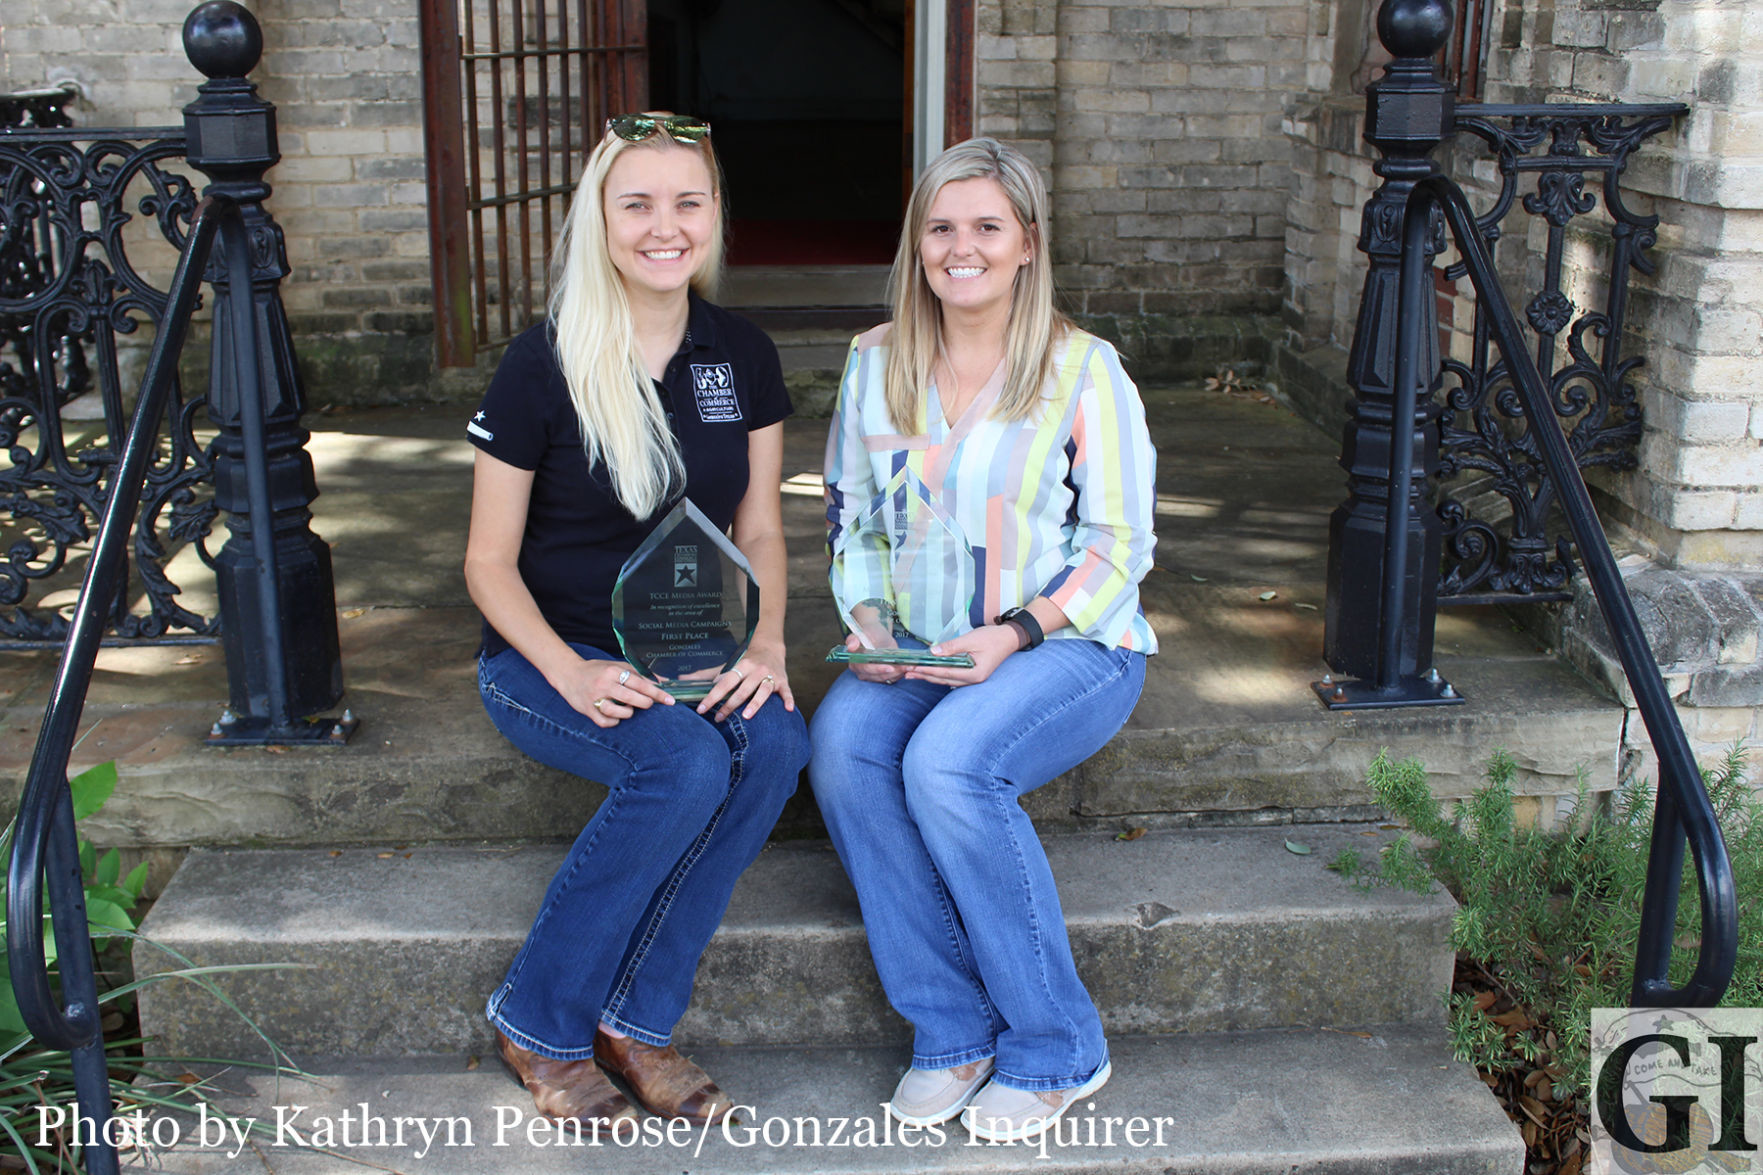 Gonzales Chamber of Commerce Executive Director Daisy Freeman-Freeman and Administrative Assistant Liz Riley with two of the chamber's recent awards.